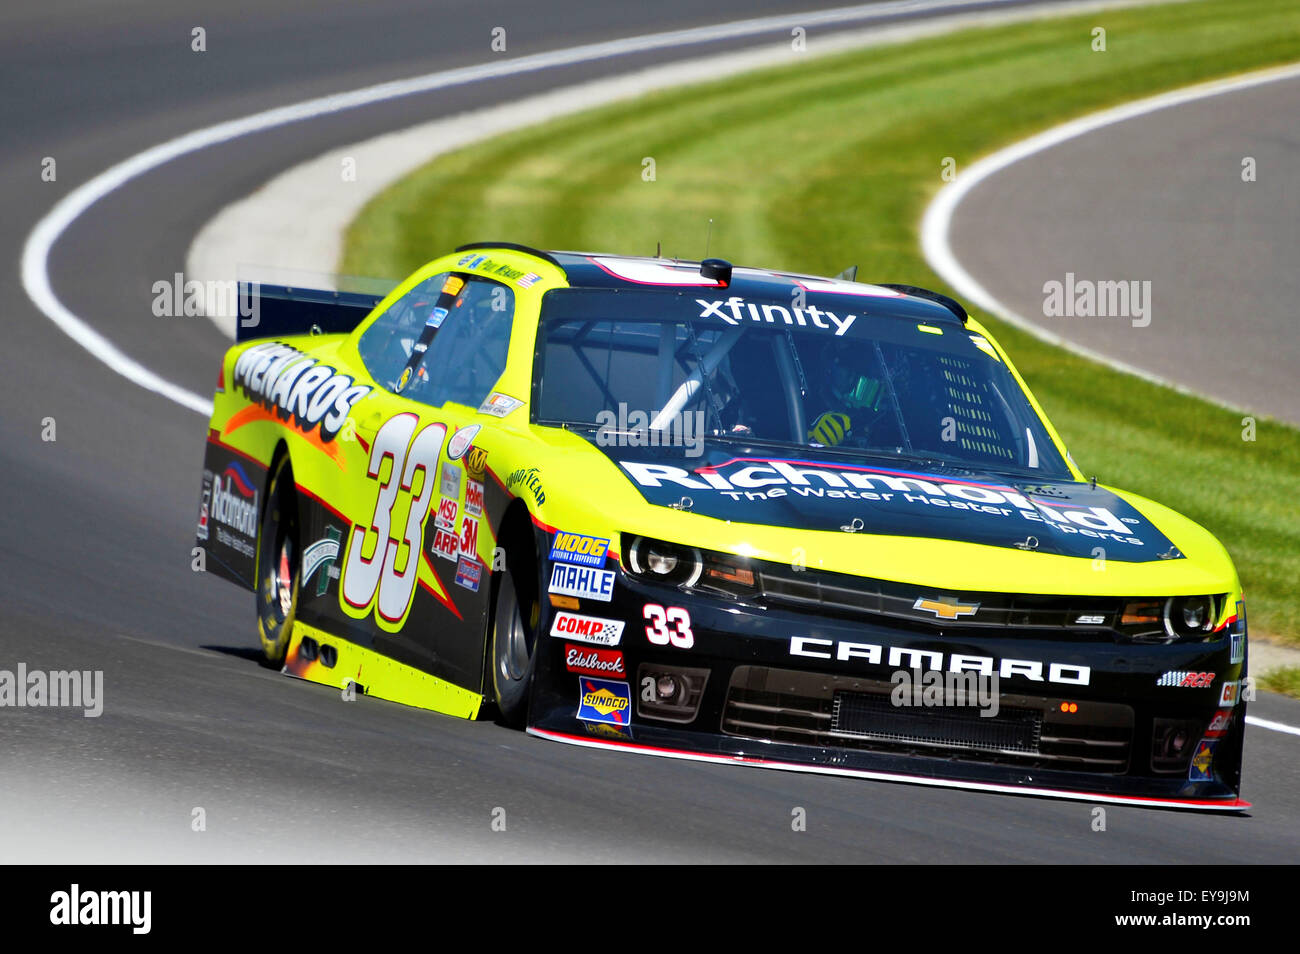 Indianapolis, IN, USA. 24th July, 2015. Indianapolis, IN - Jul 24, 2015: Paul Menard (33) takes to the track for the first practice in the Richmond/Menards Chevy, preparing for the Lilly Diabetes 250 at Indianapolis Motor Speedway in Indianapolis, IN. Credit:  csm/Alamy Live News Stock Photo